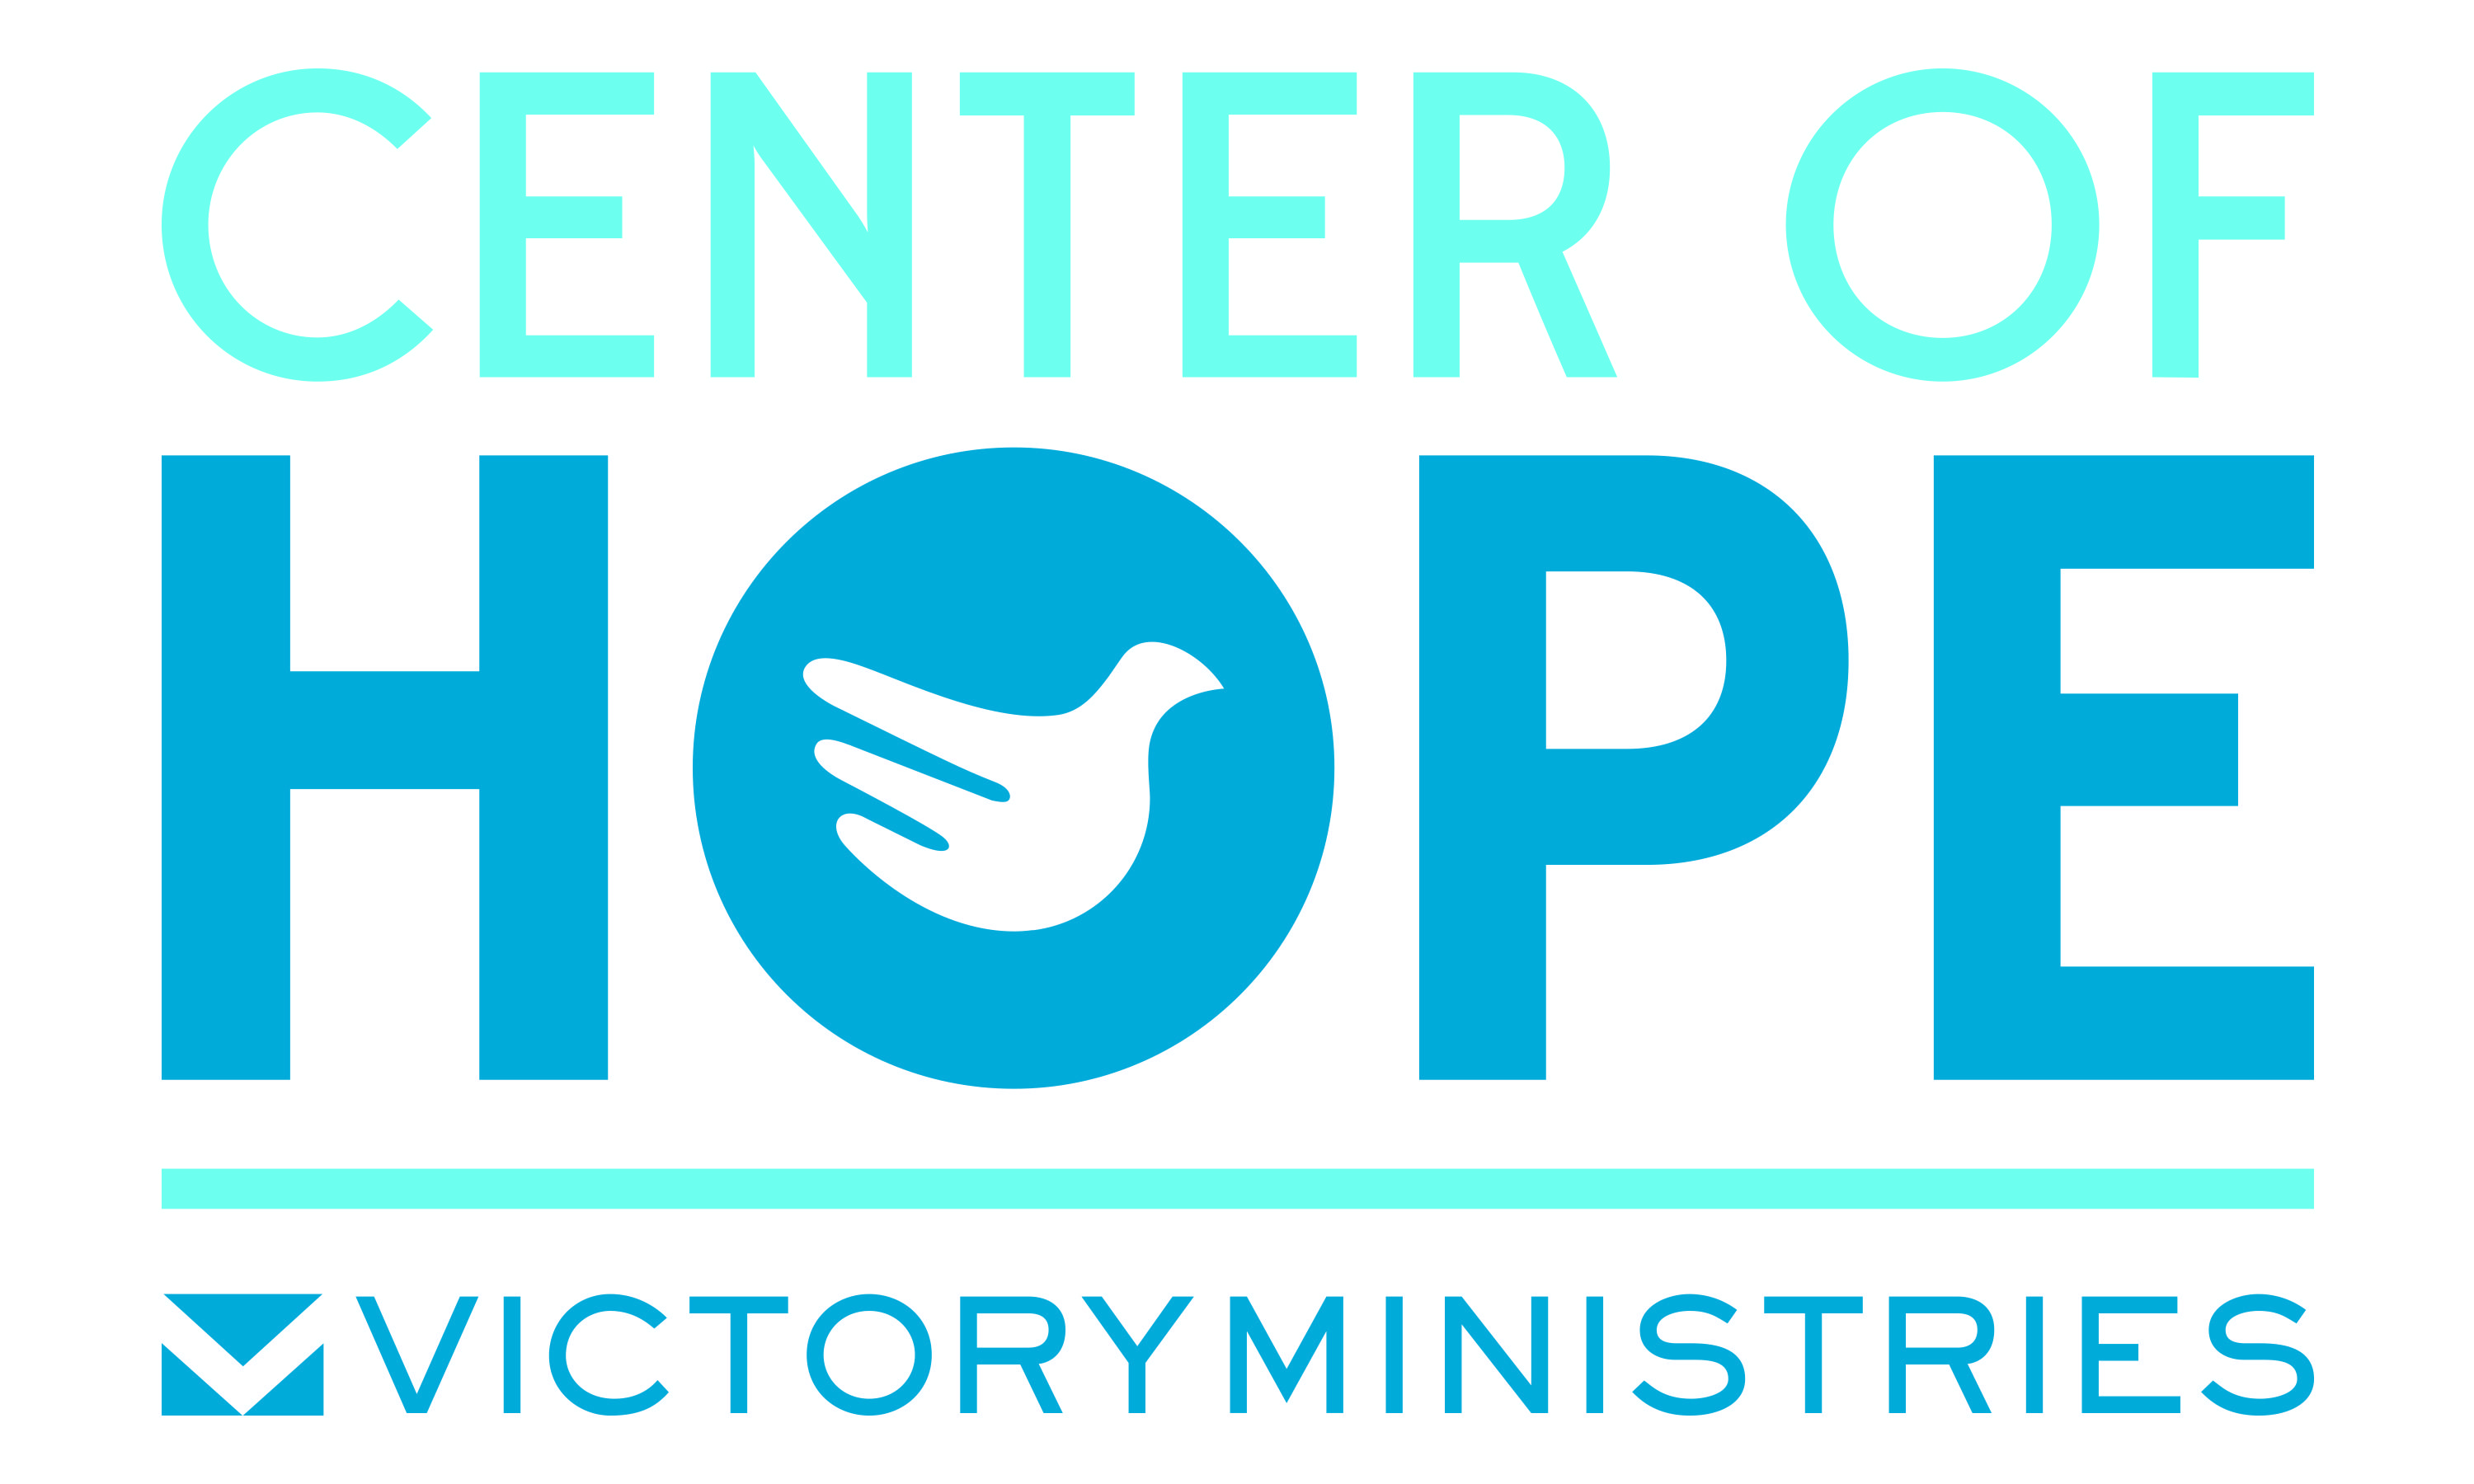 Victory Ministries - Center of Hope Logo